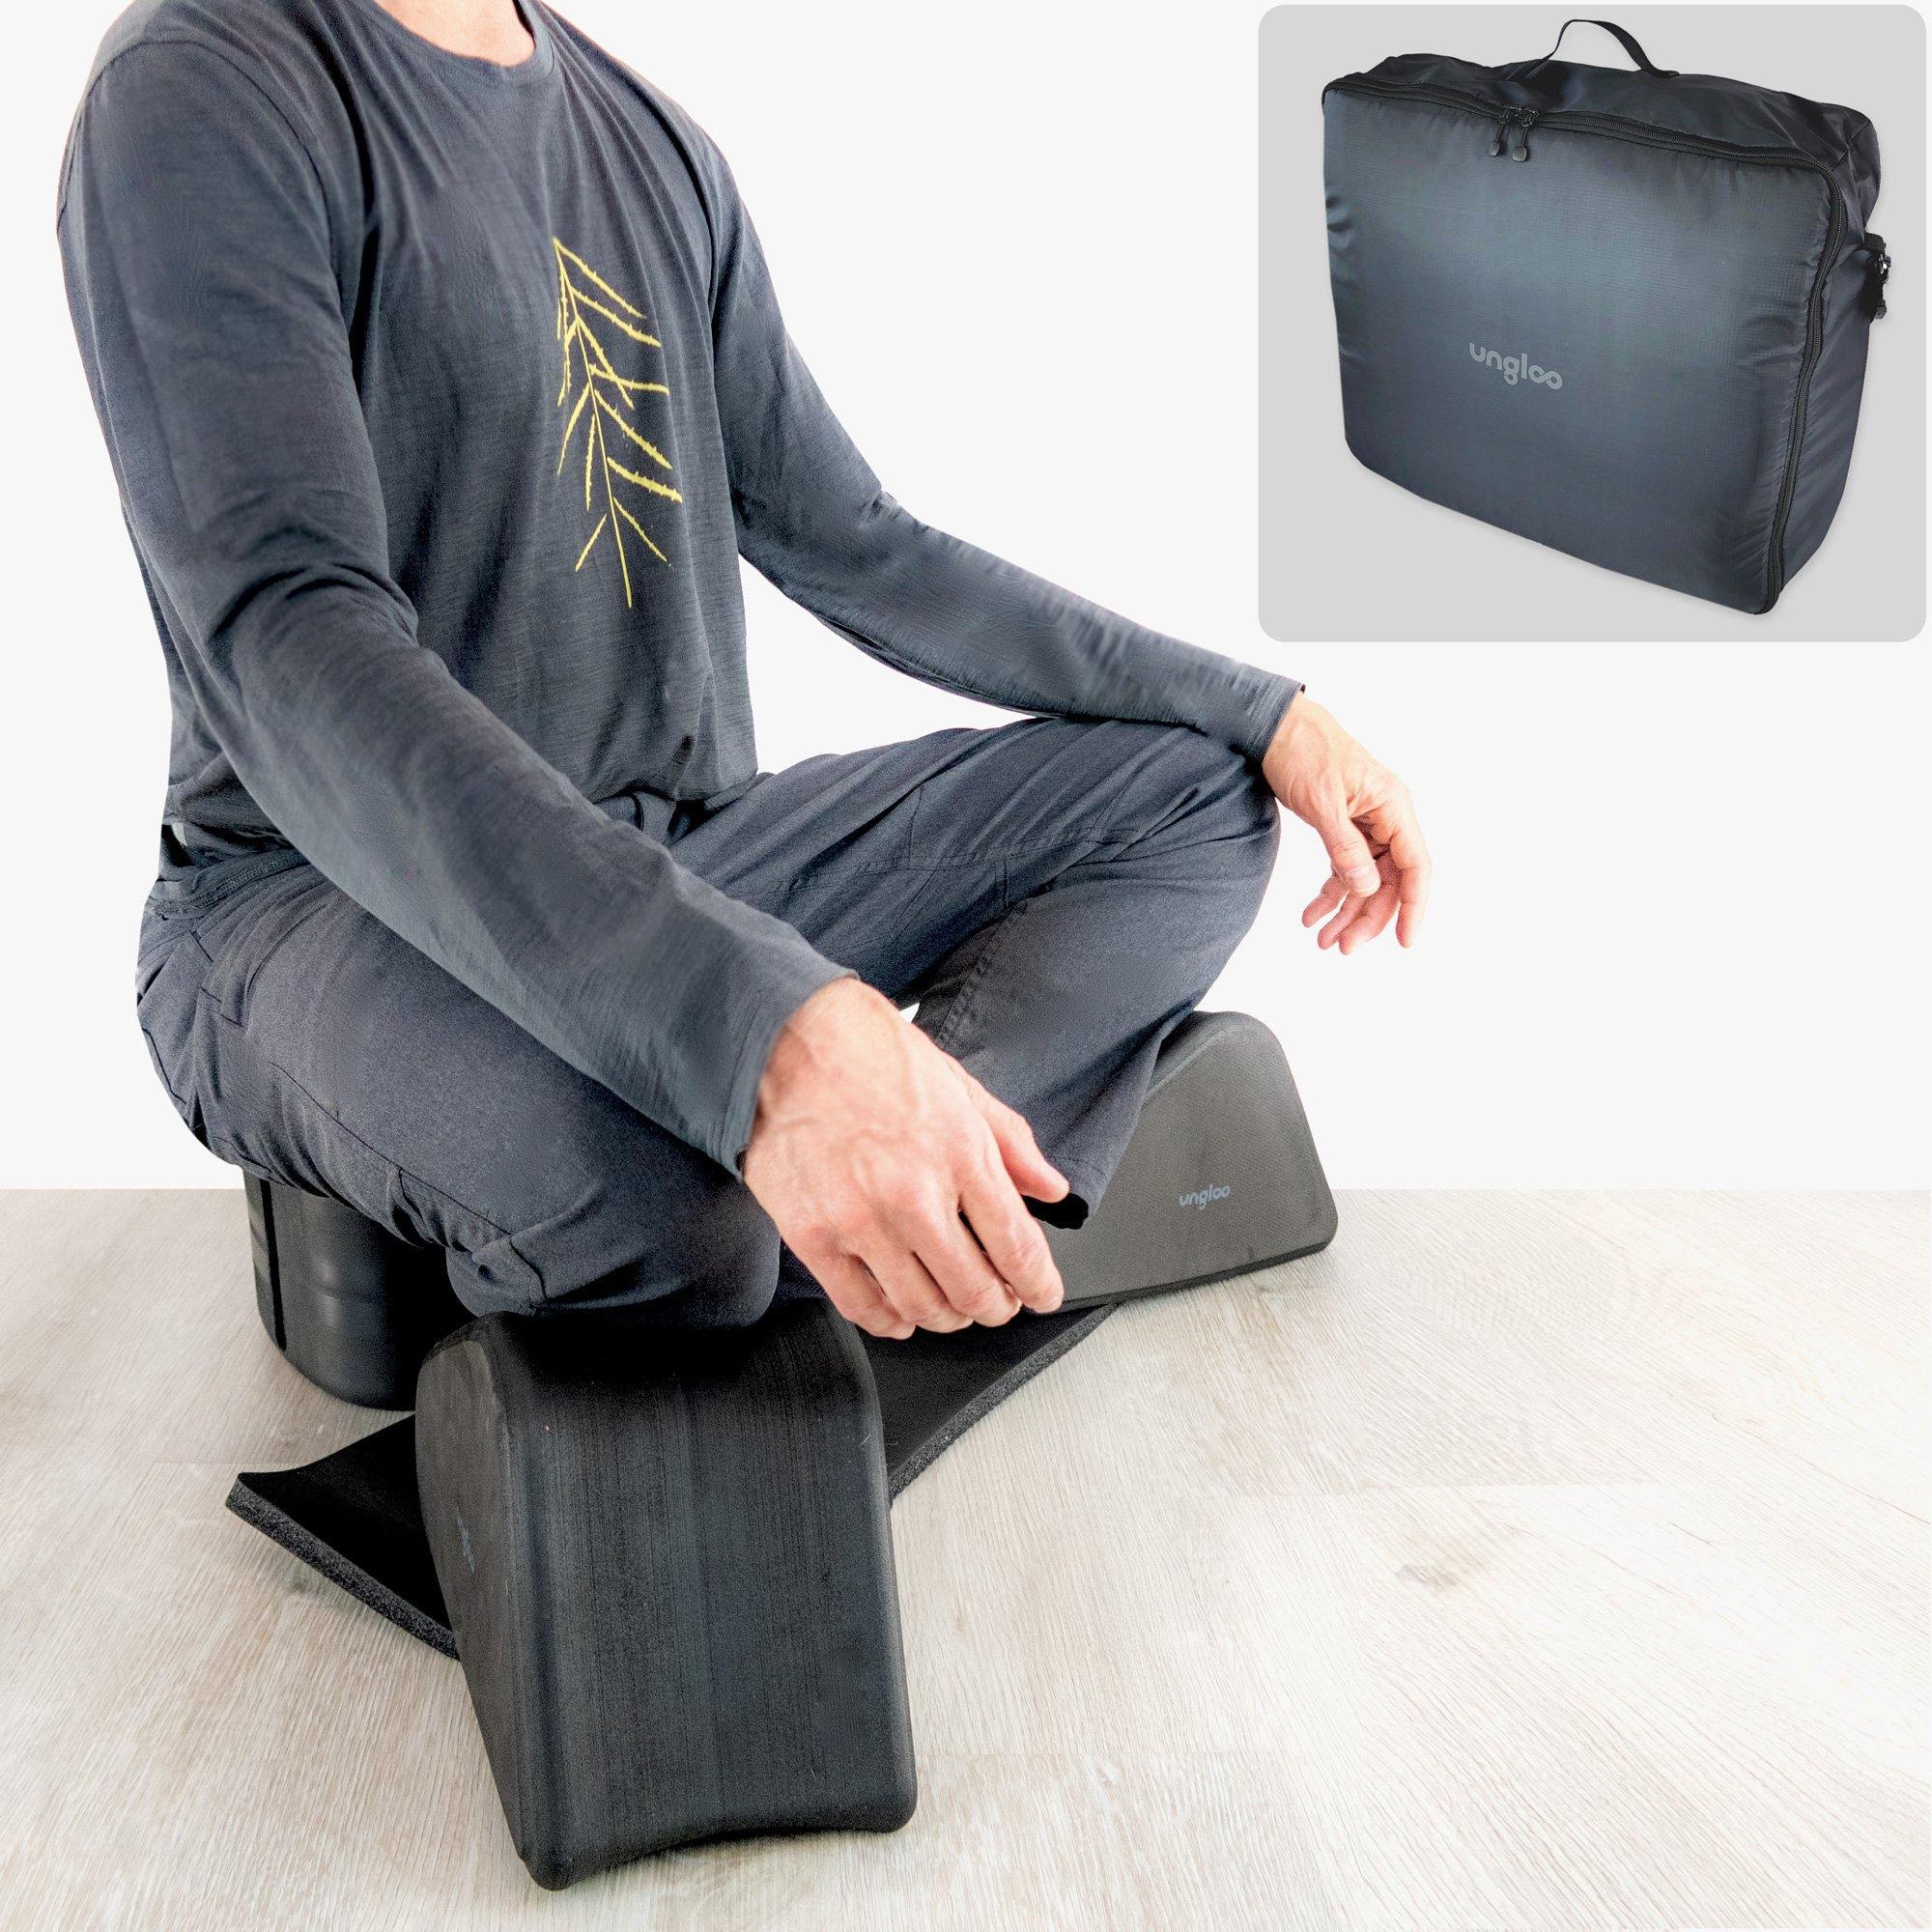 Ungloo Box - Portable Meditation Chair With Back Support